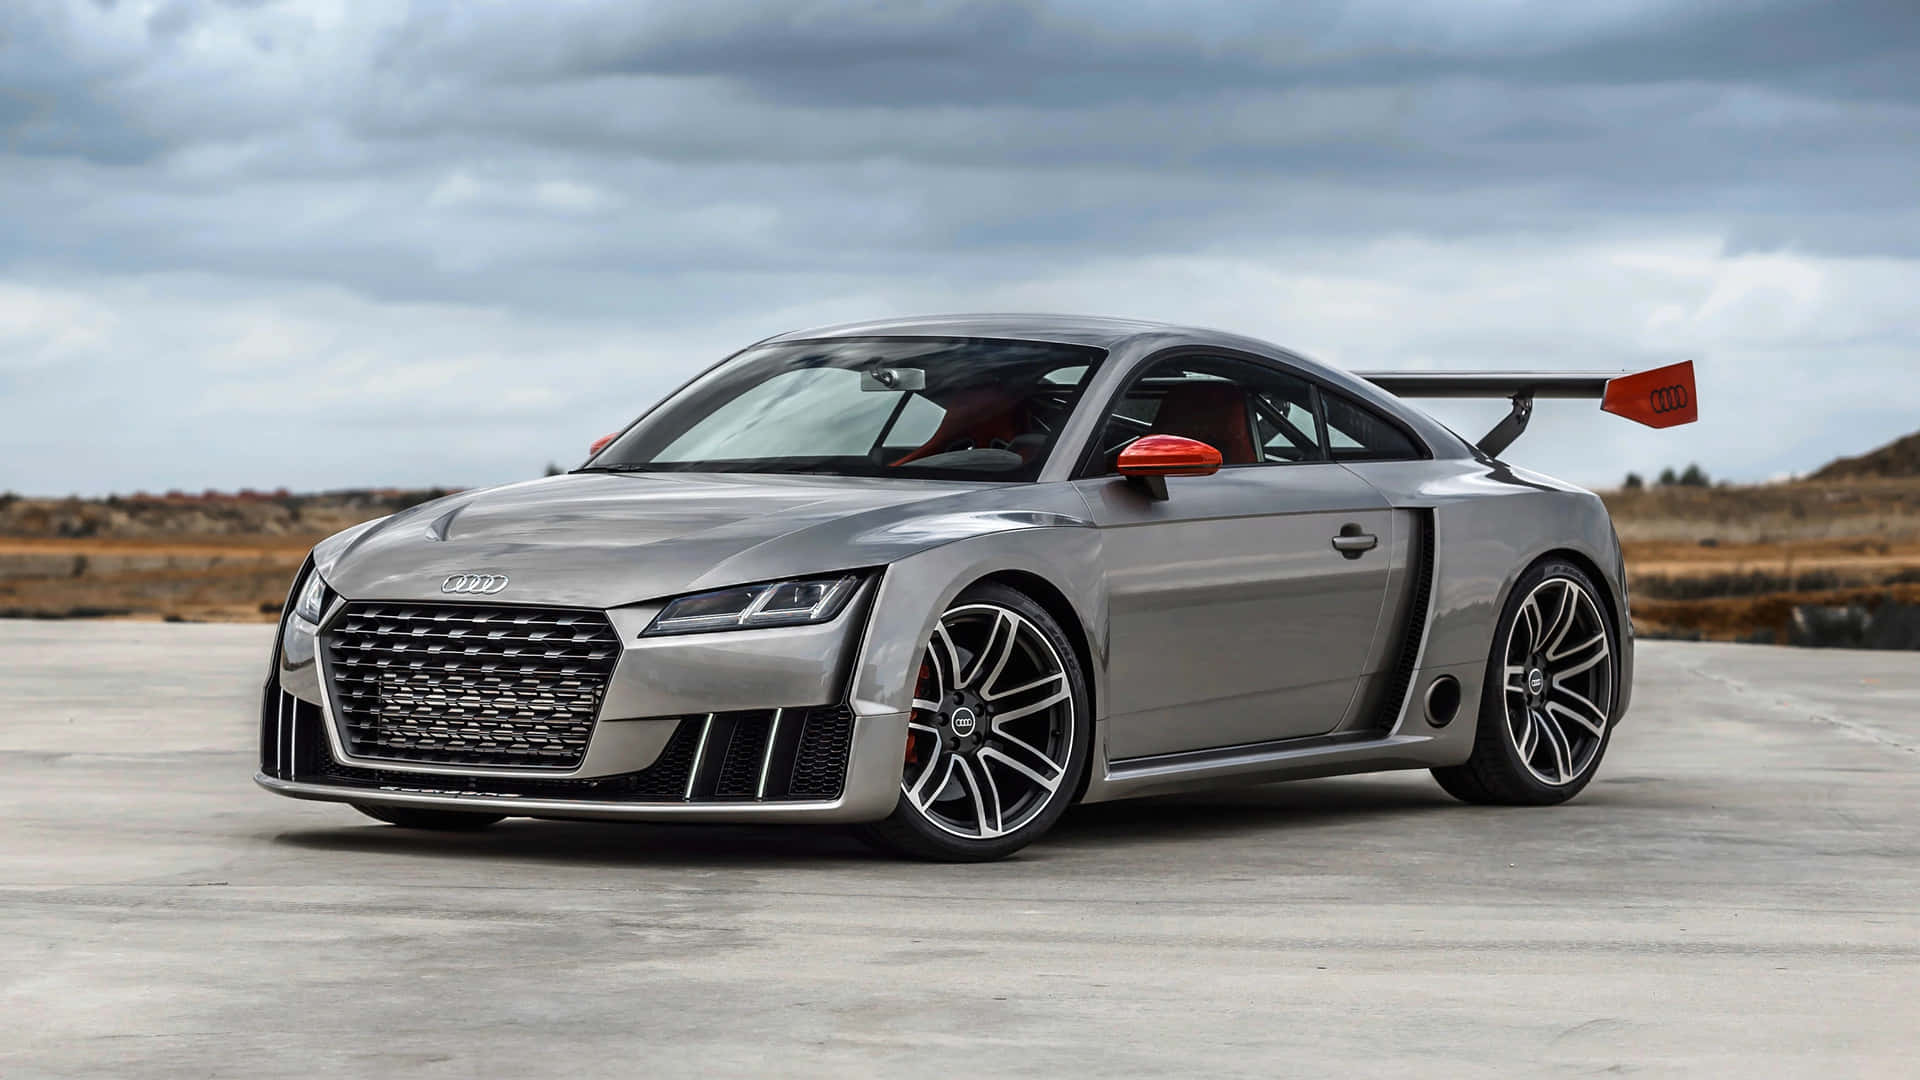 A Stunning Audi TT RS Sports Coupe on the Road Wallpaper